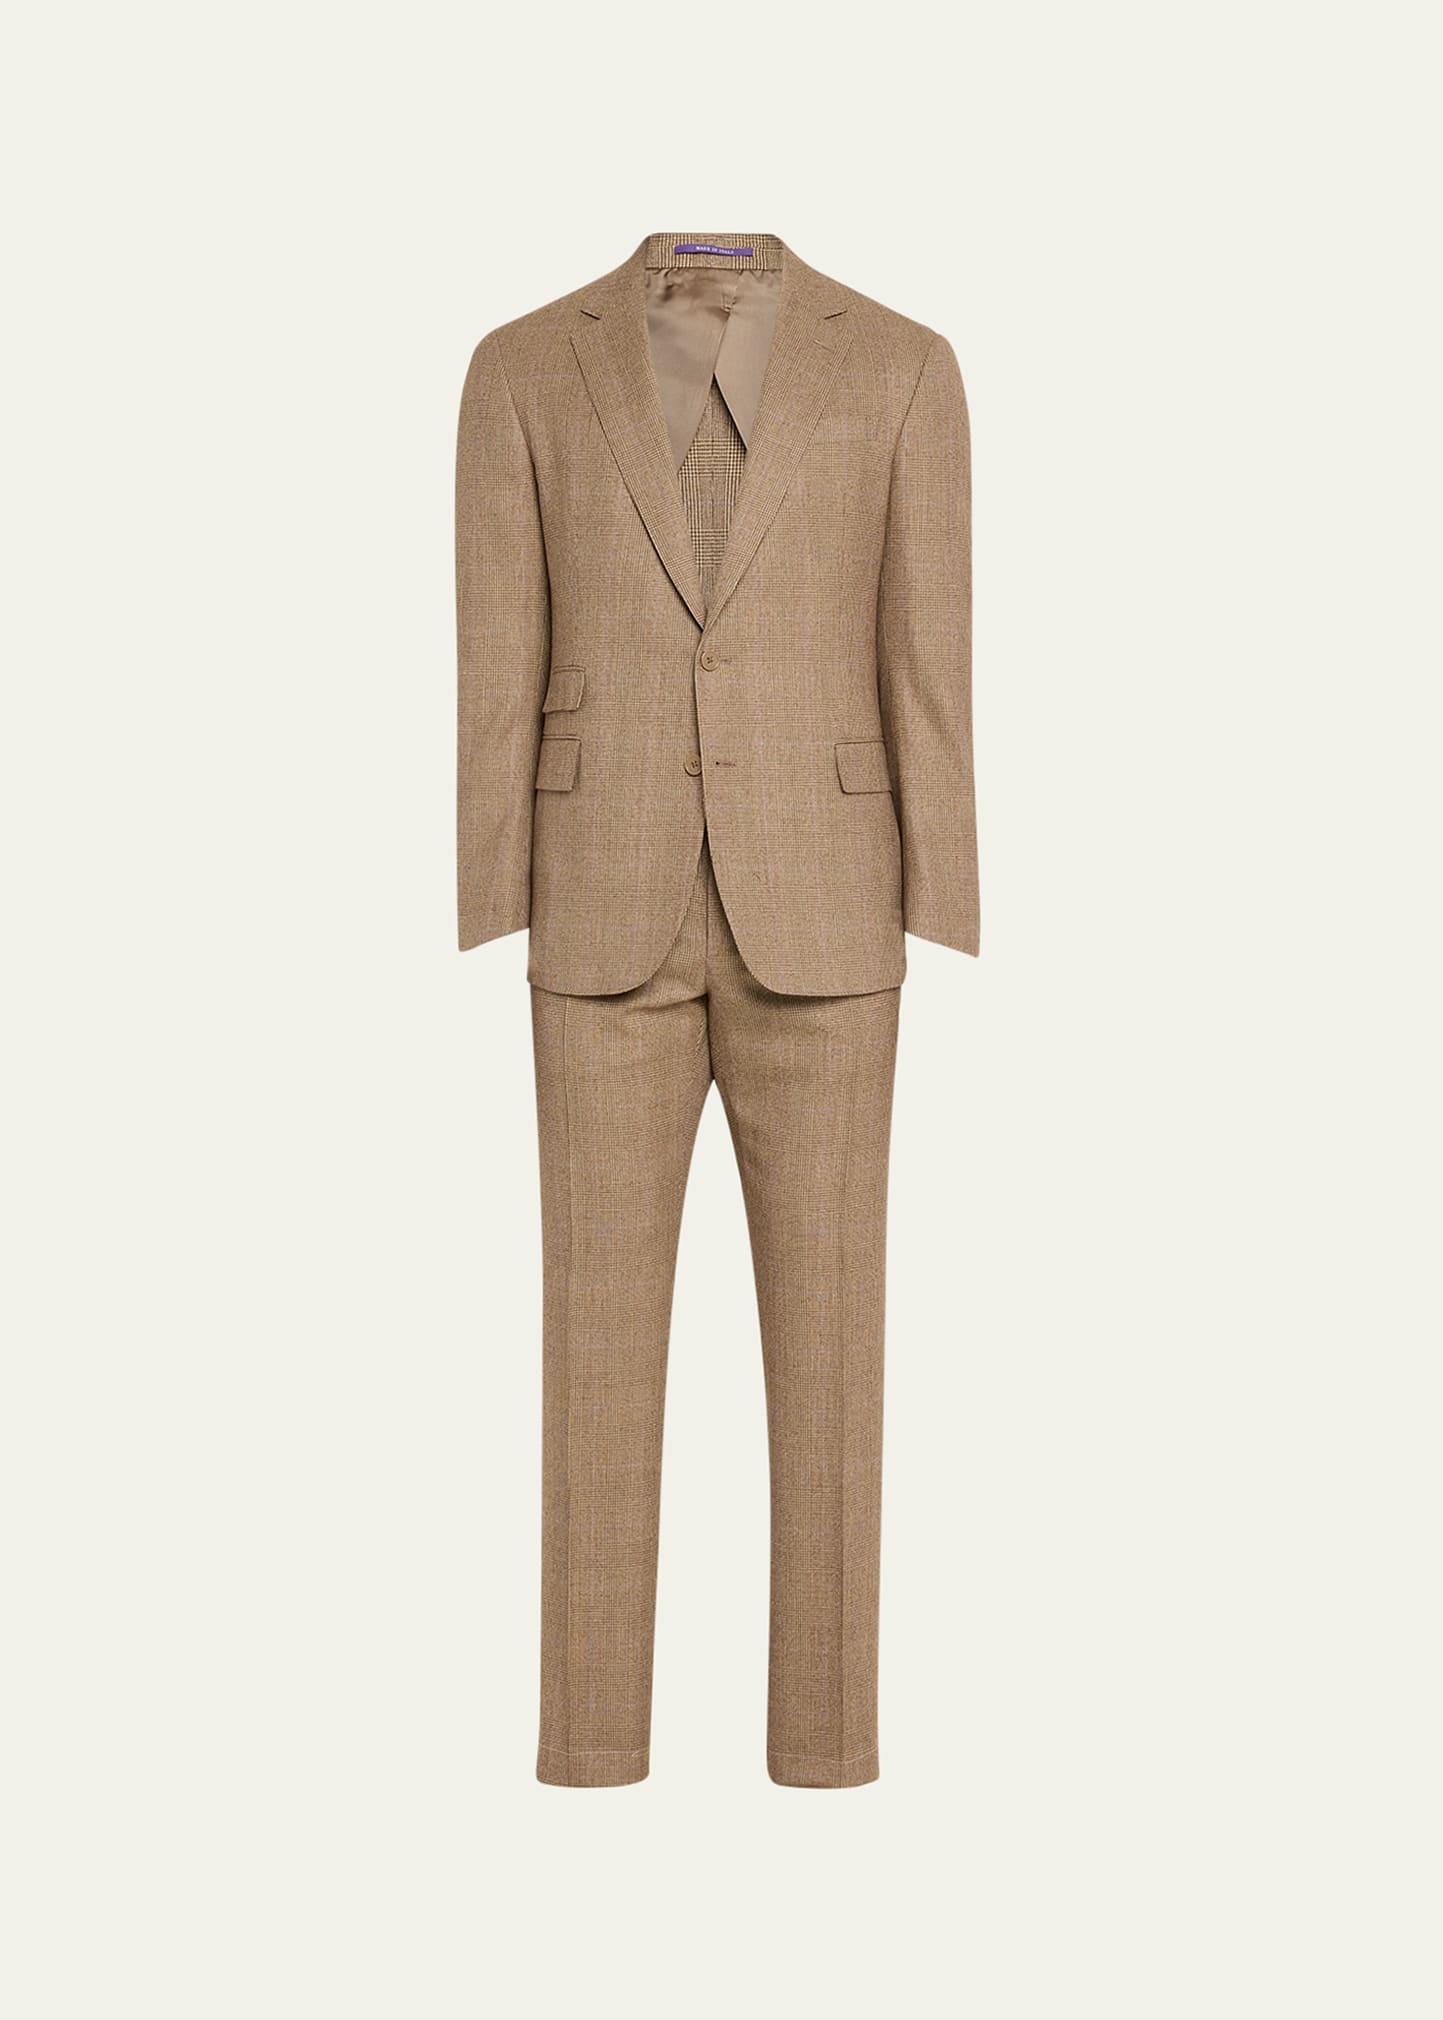 Men's Kent Hand-Tailored Plaid Wool and Cashmere Suit - 1